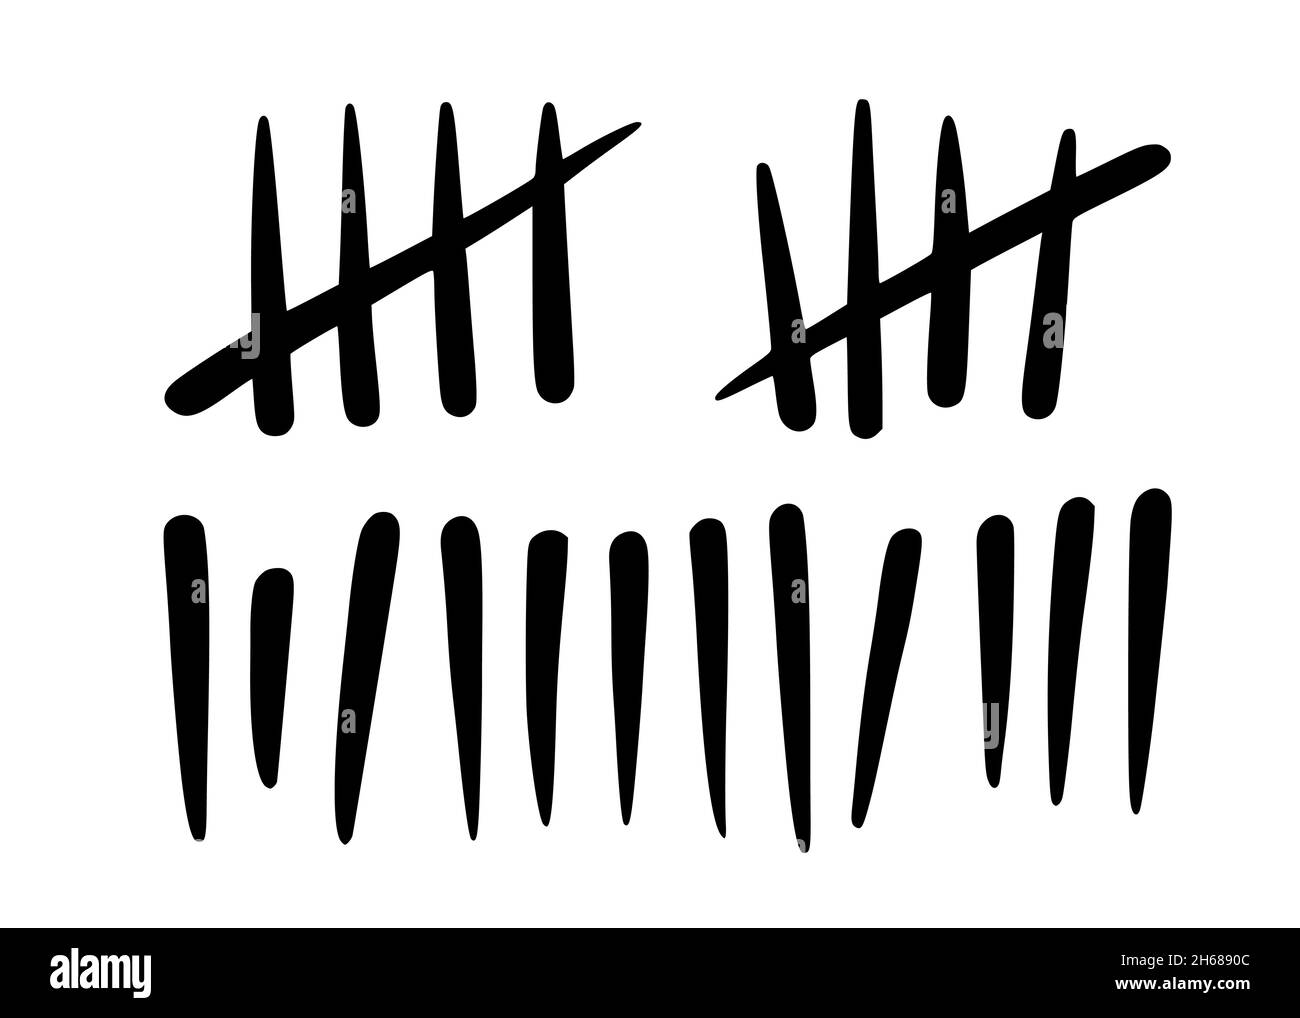 Tally marks to count days in prison. Tally marks for math lessons isolated on white background. Vector illustration Stock Vector